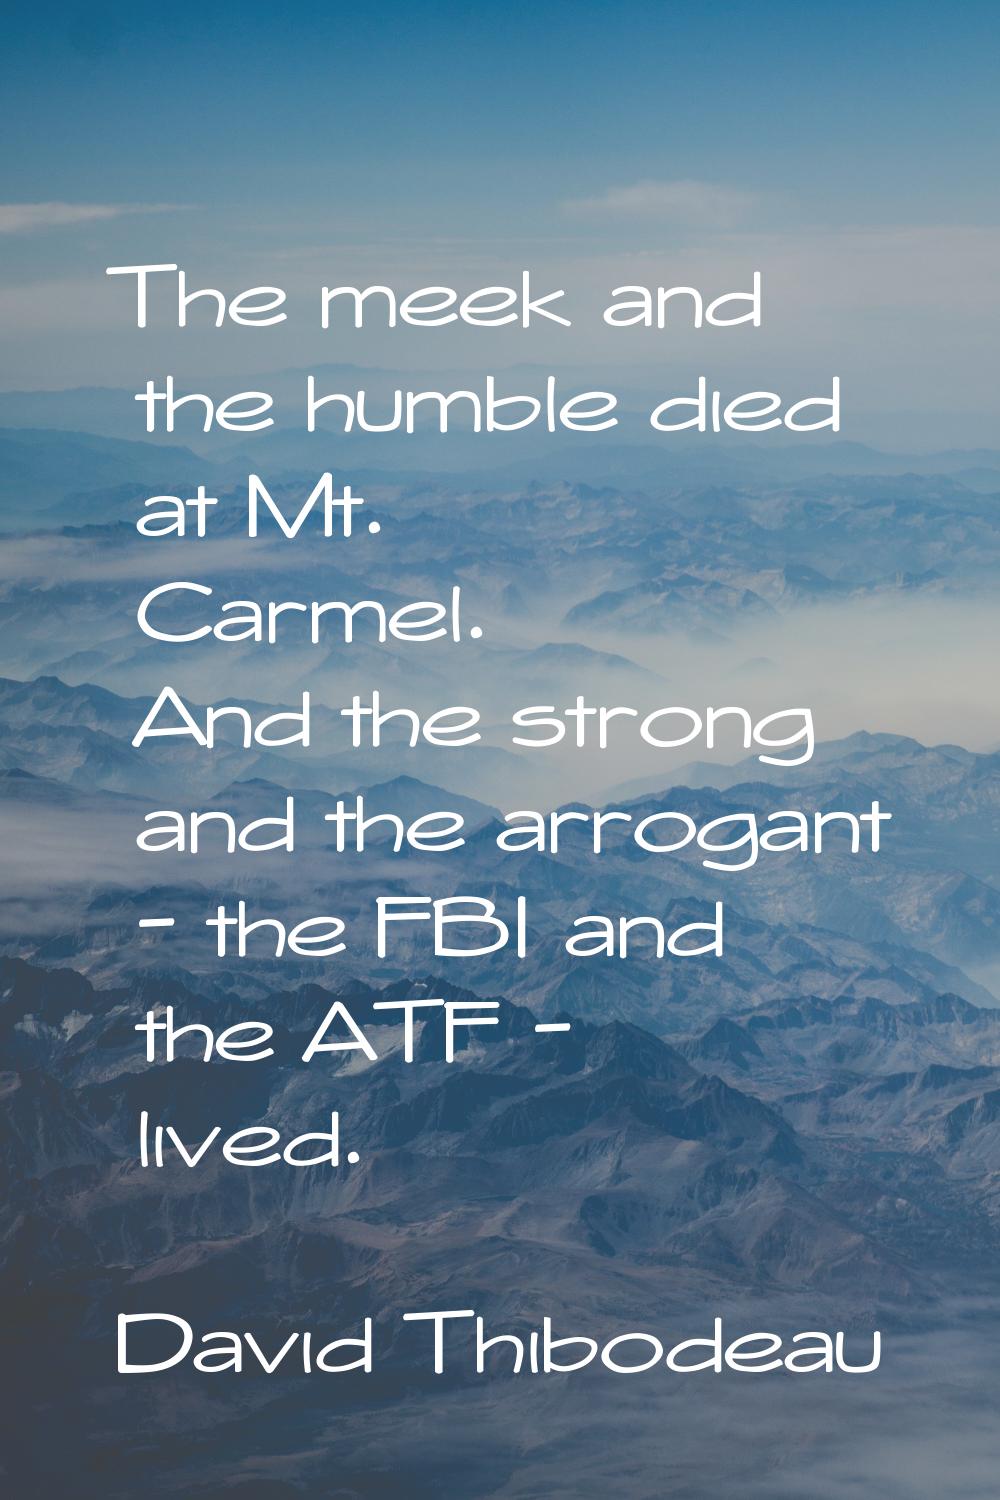 The meek and the humble died at Mt. Carmel. And the strong and the arrogant - the FBI and the ATF -